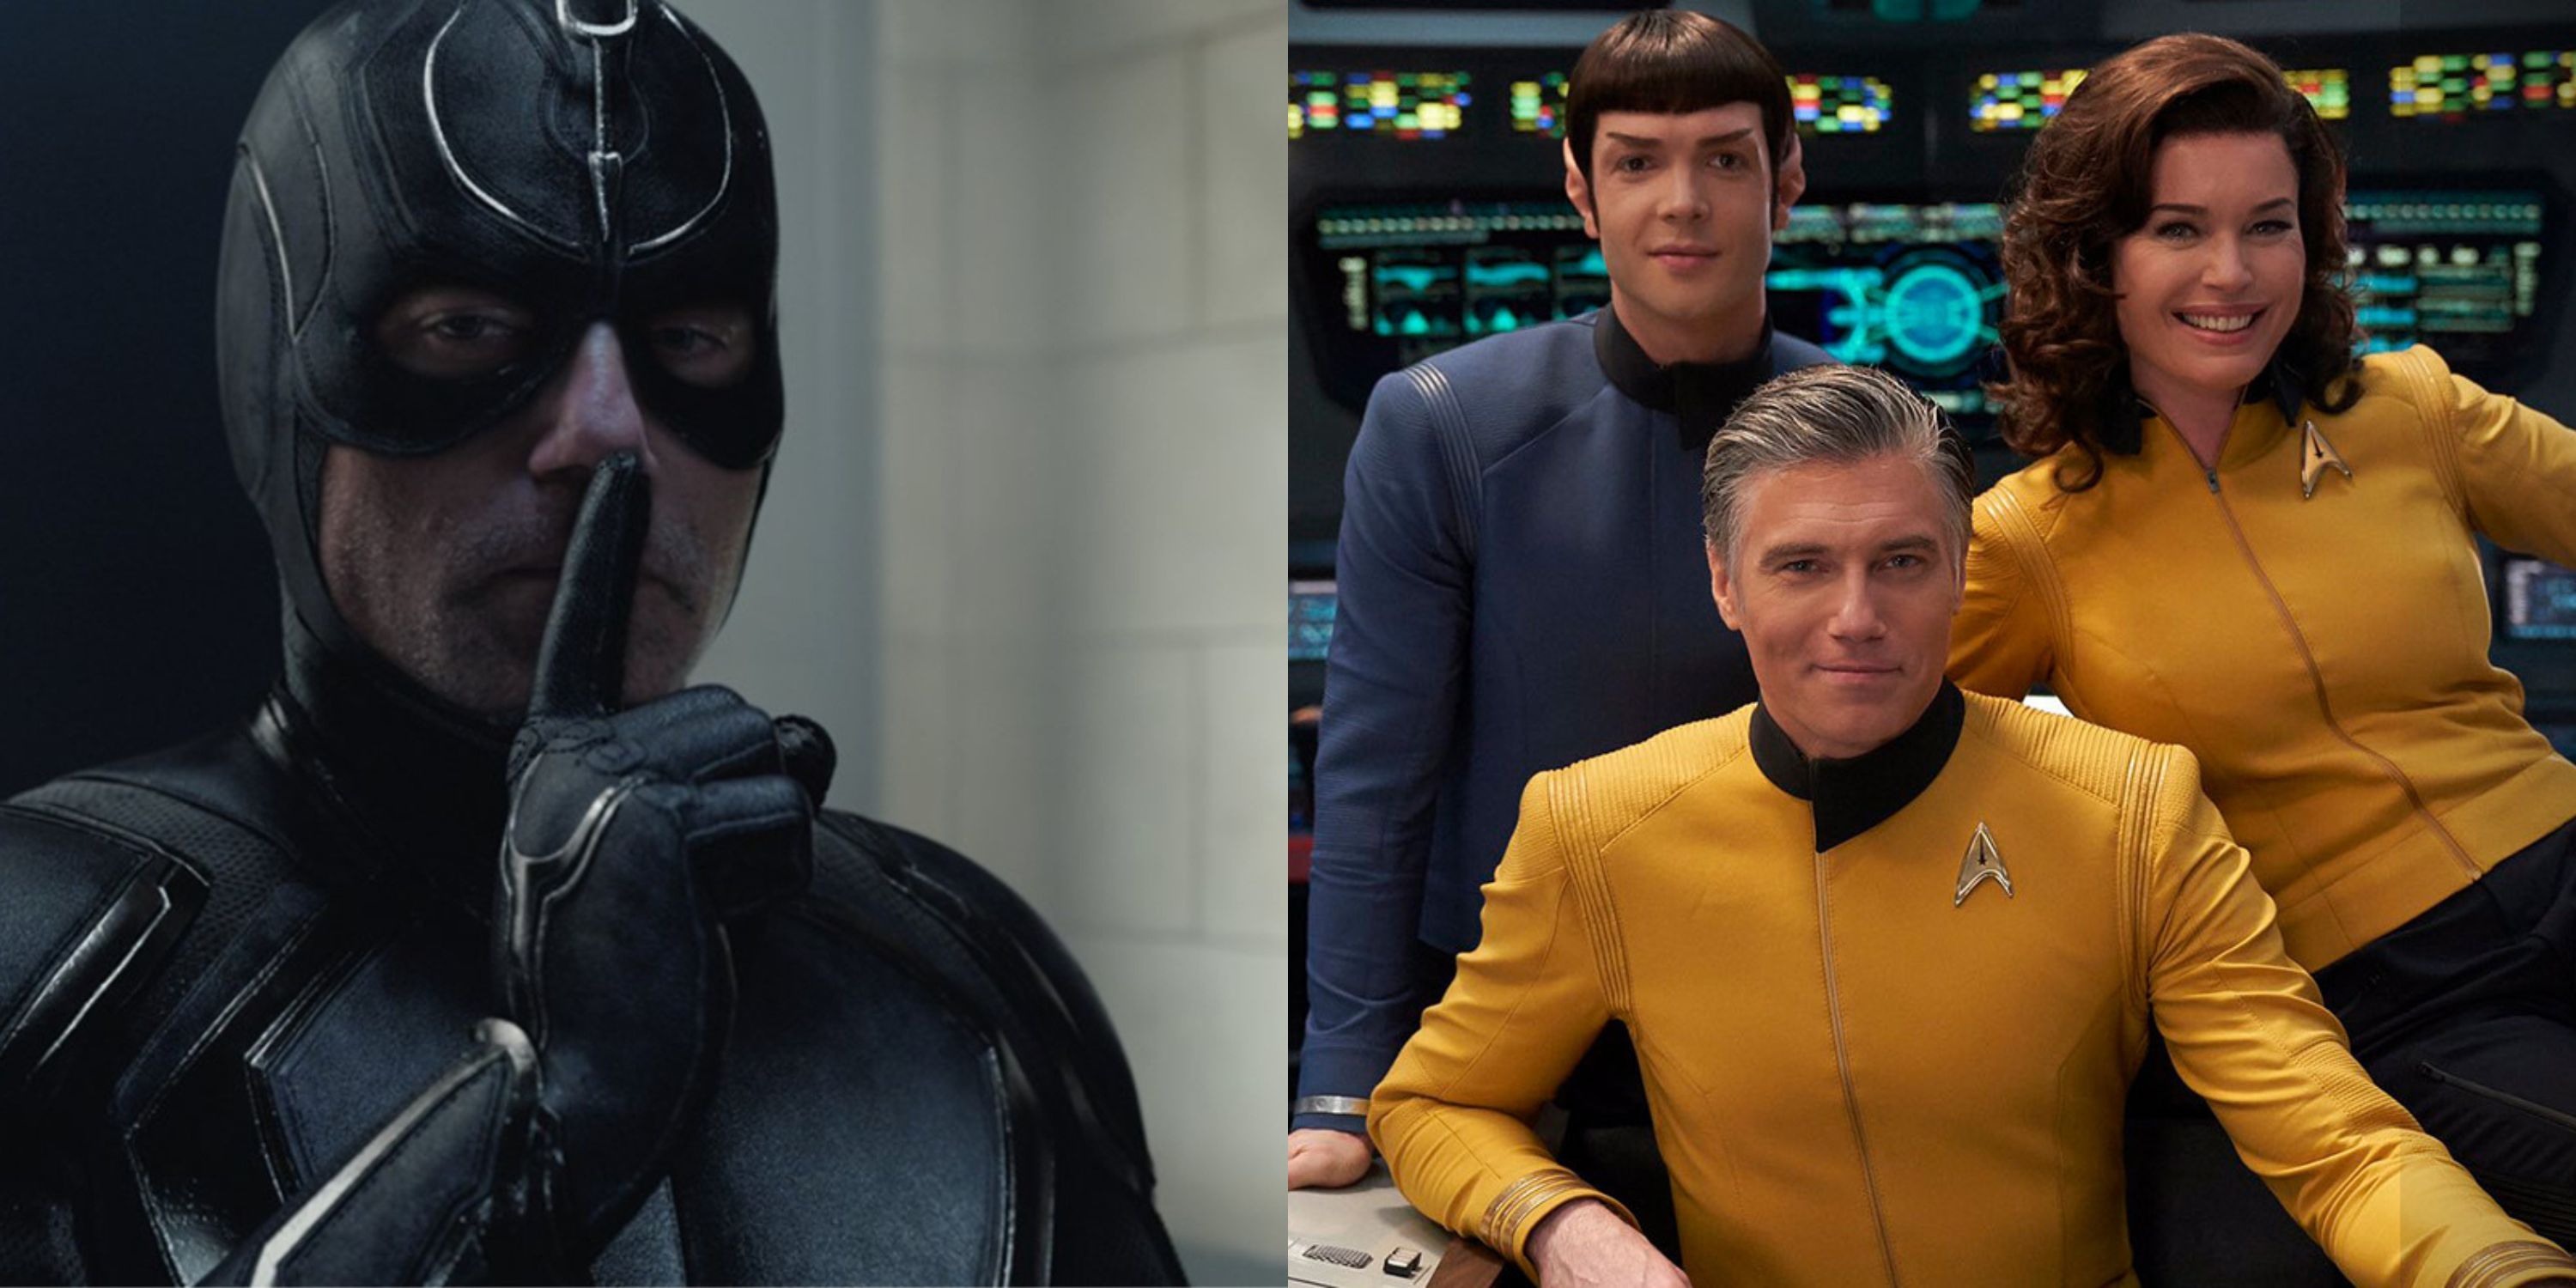 Featured image Anson Mount as Black Bolt in Dr Strange in the Multiverse of Madness and as Captain Pike in Star Trek Strange New Worlds